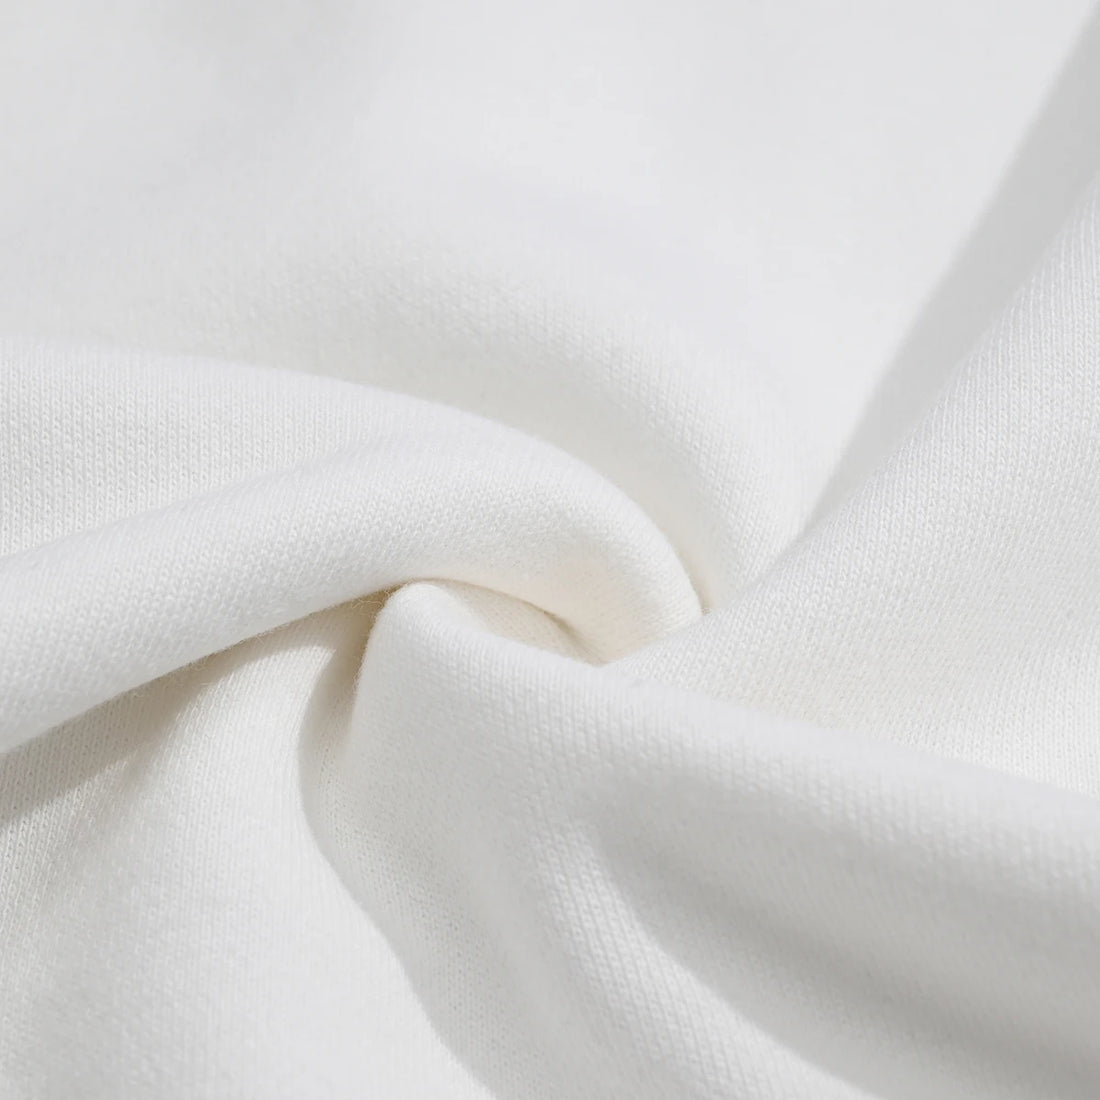 Cotton - The Best Fabric for Human Skin